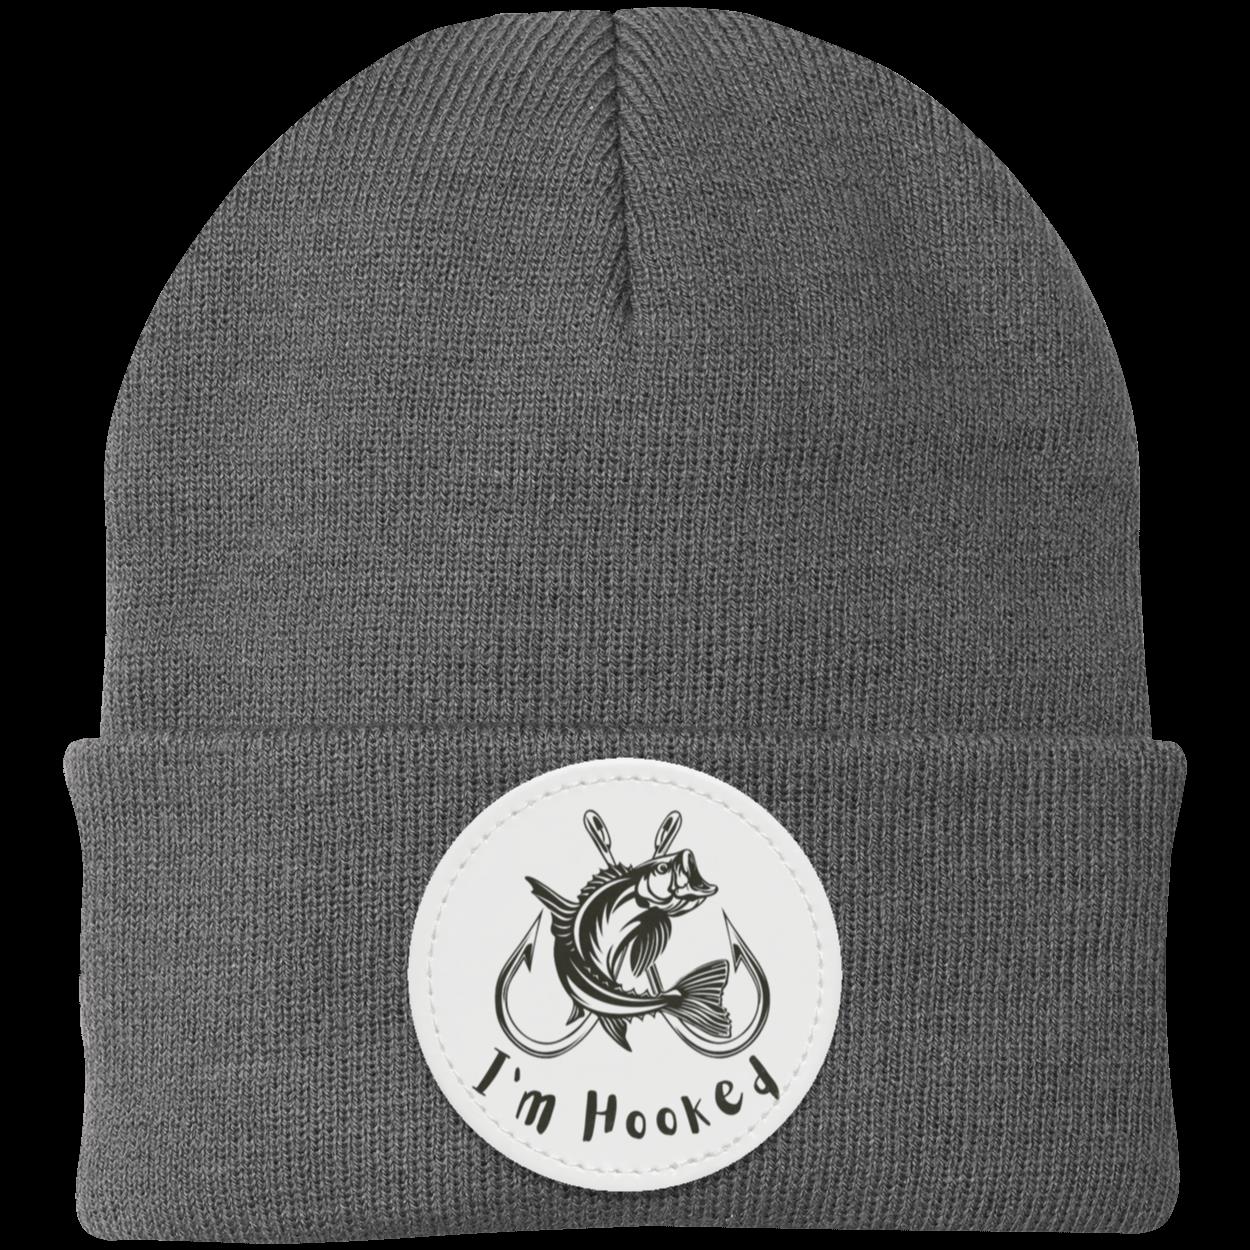 I'm Hooked Hat | For Fishing Lovers | Knit Cap - Patch